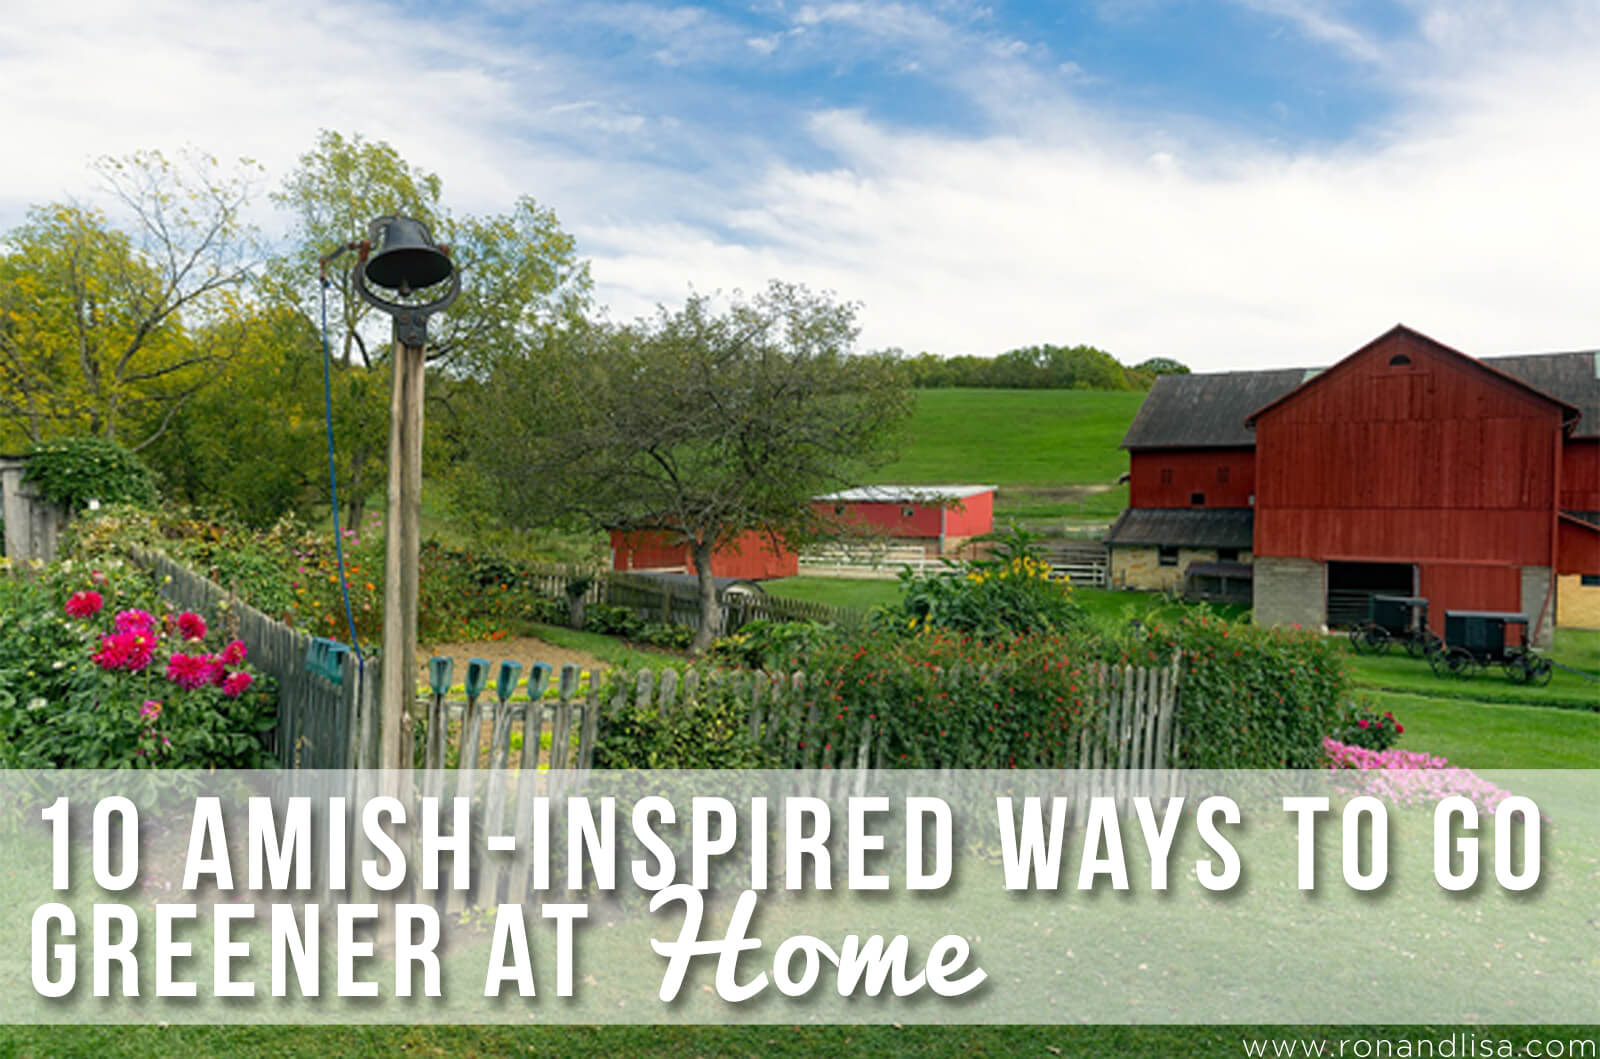 10 Amish-Inspired Ways To Go Greener At Home